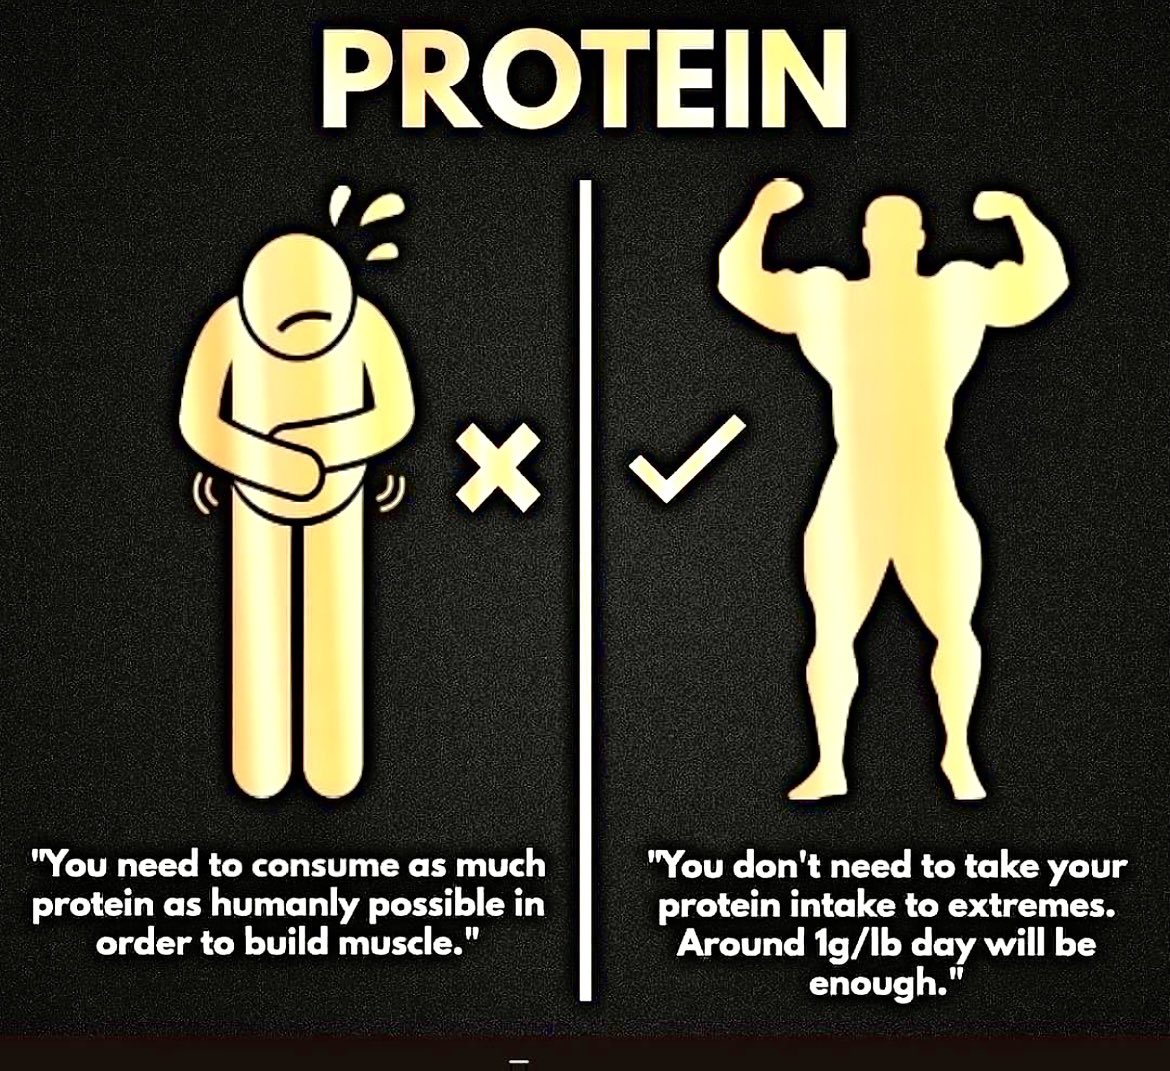 Top 5 Benefits of protein ?
 1.Muscle Growth and Repair: Protein provides the essential building blocks (amino acids) necessary for muscle tissue repair and growth after exercise or injury.

Thread 🧵